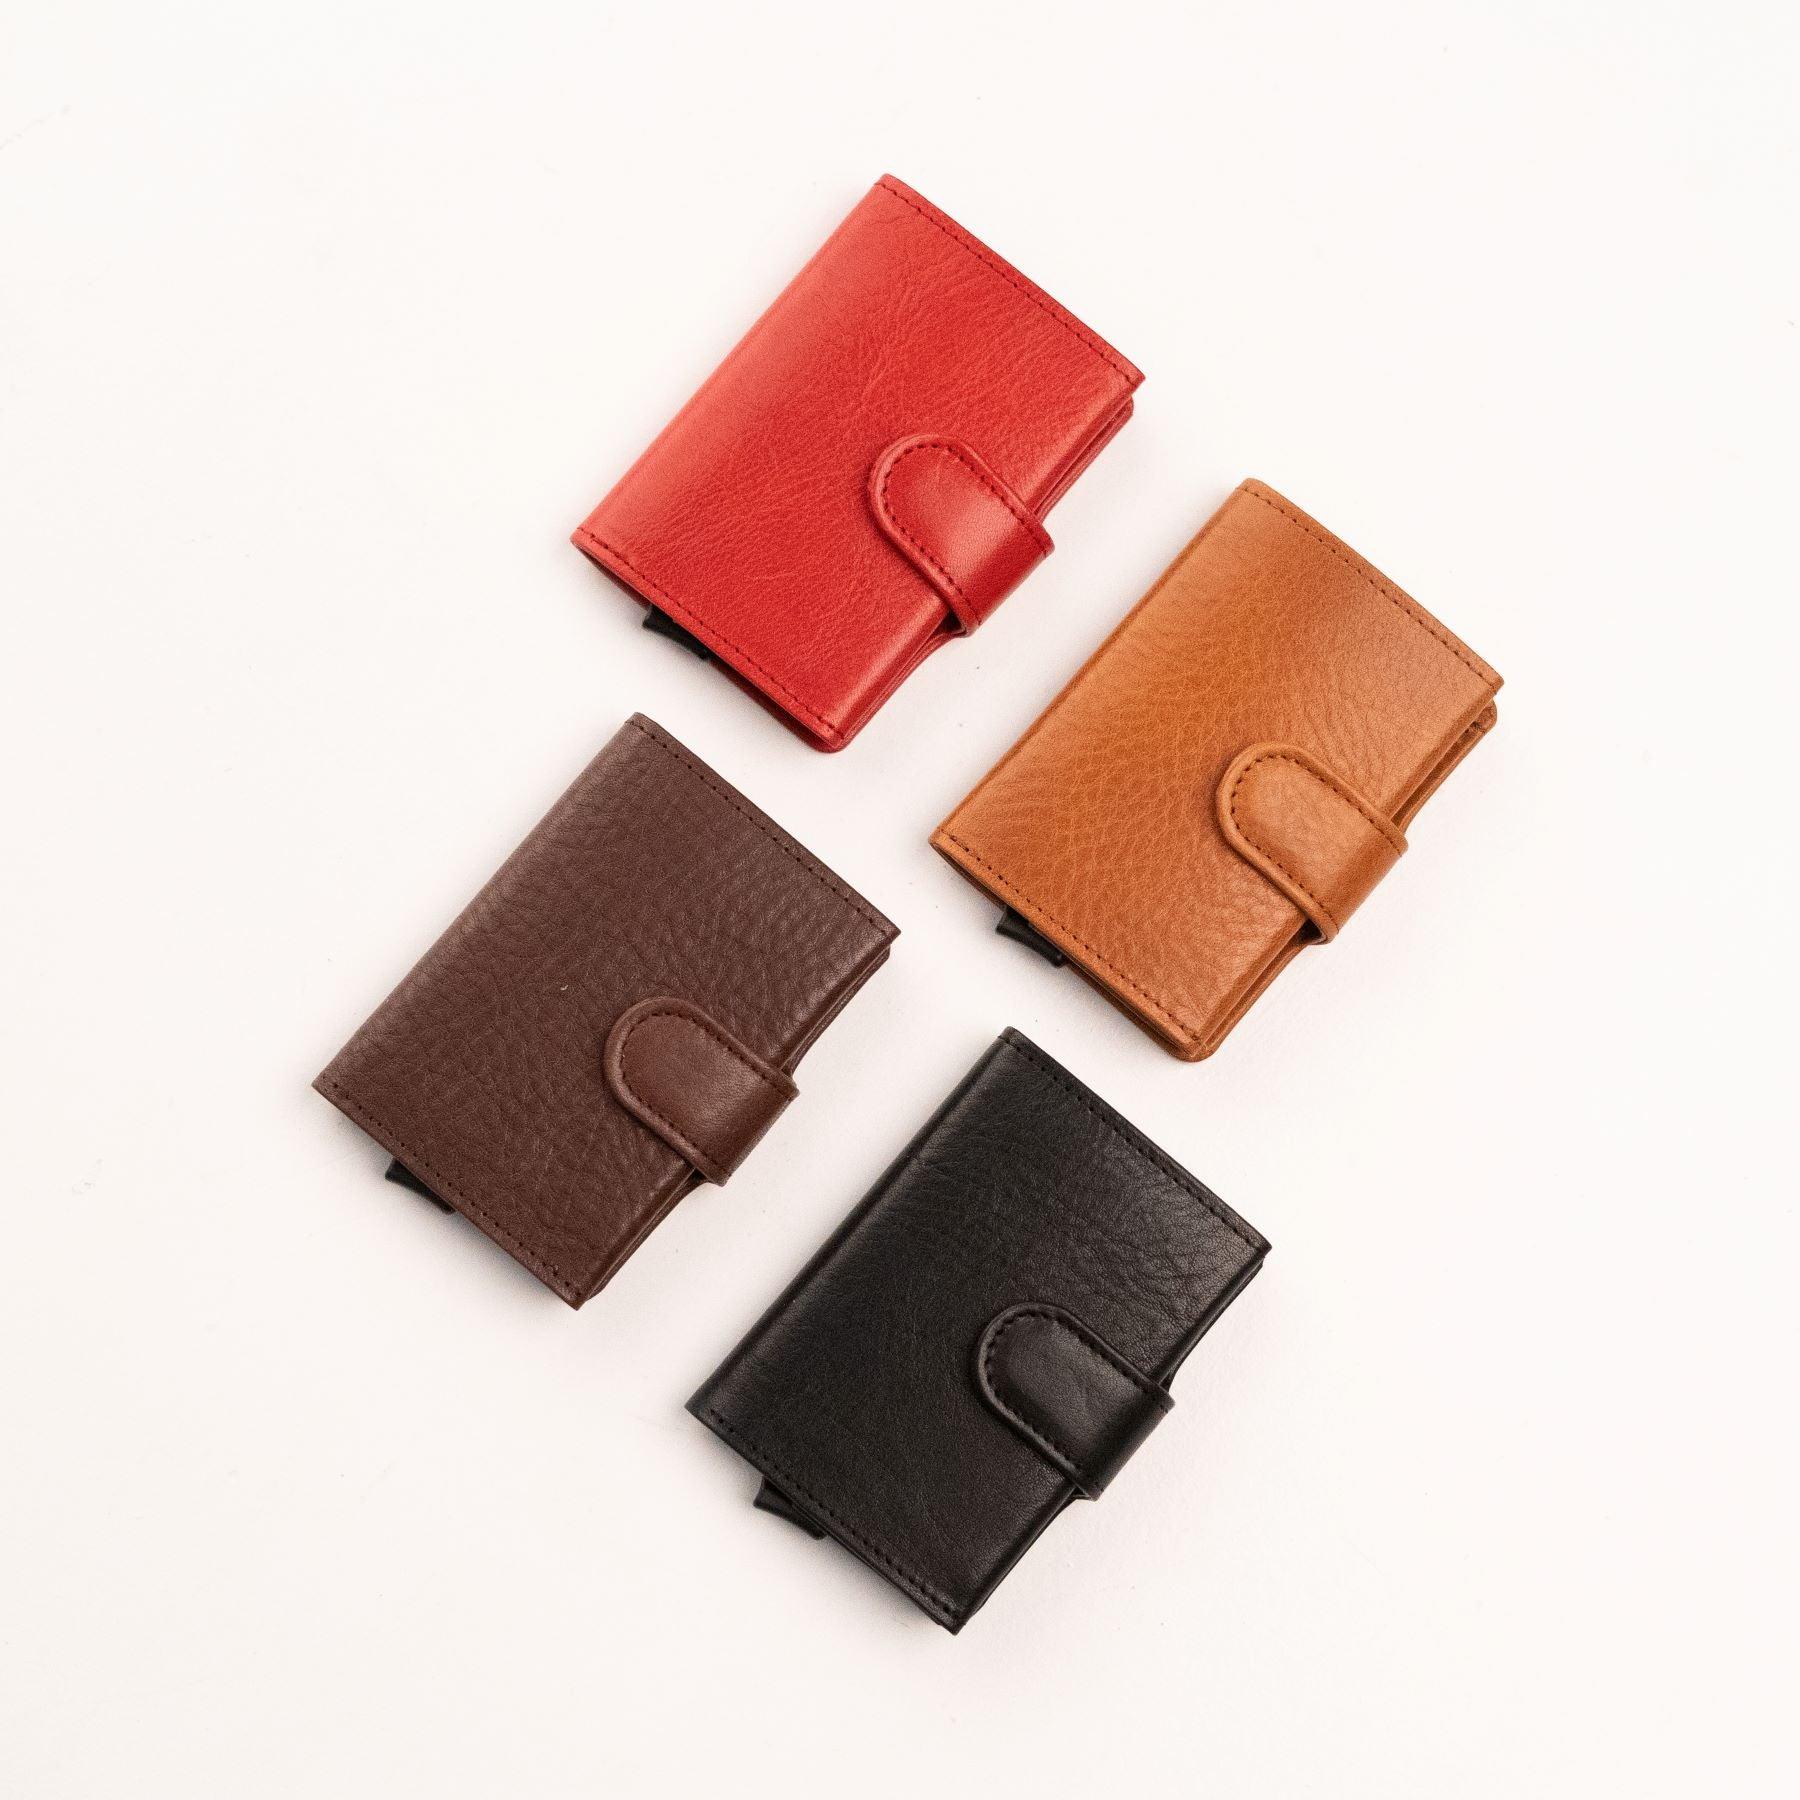 Leather Wallet 40-25 with RFID/NFC Blocking Card Holder - RUUD Studios